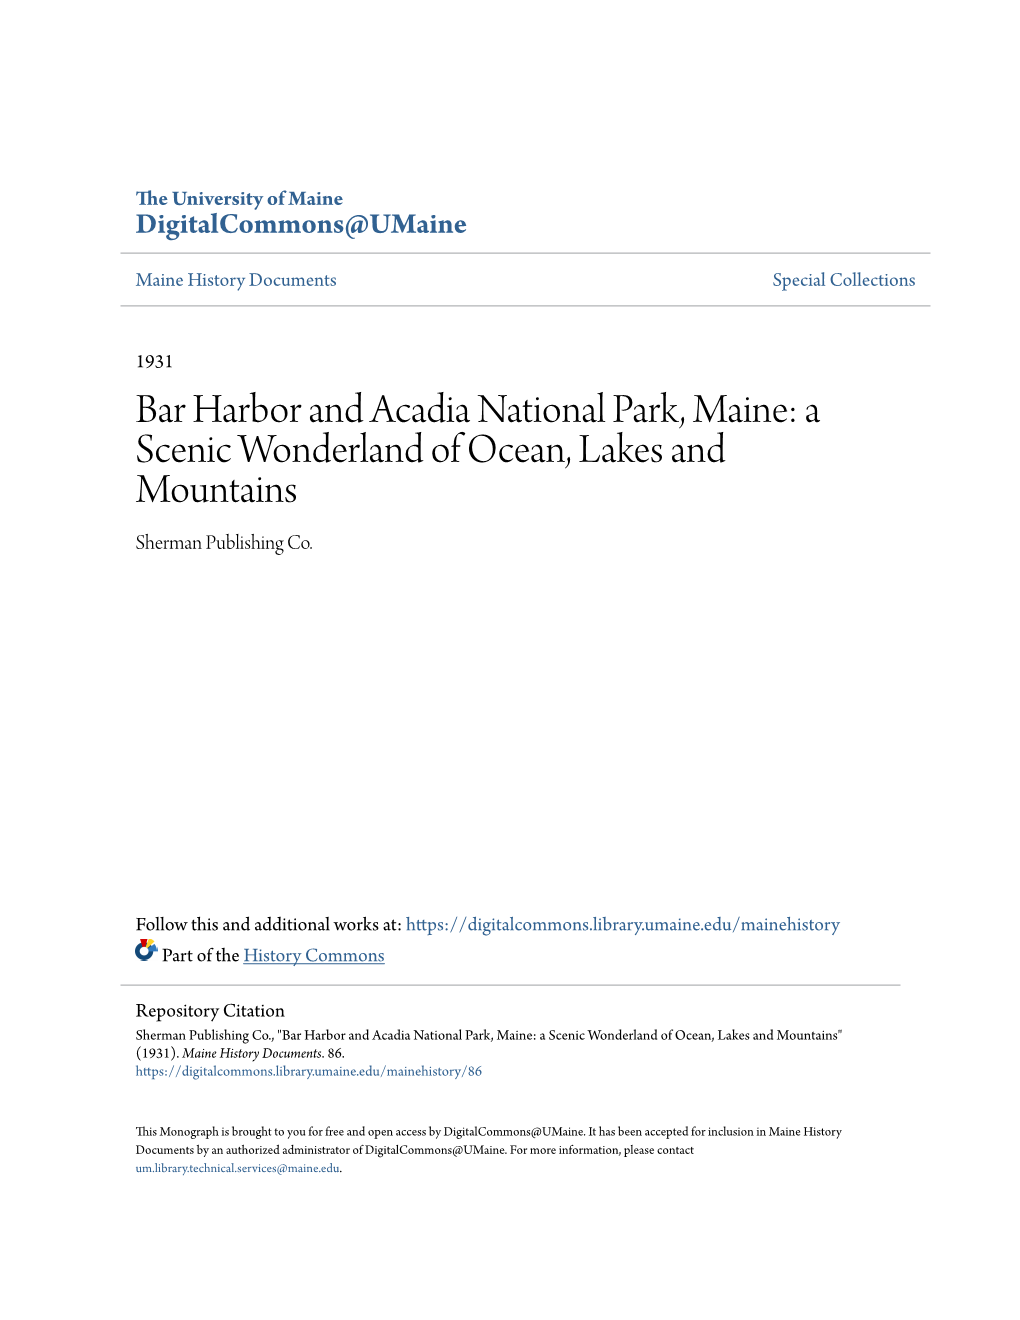 Bar Harbor and Acadia National Park, Maine: a Scenic Wonderland of Ocean, Lakes and Mountains Sherman Publishing Co